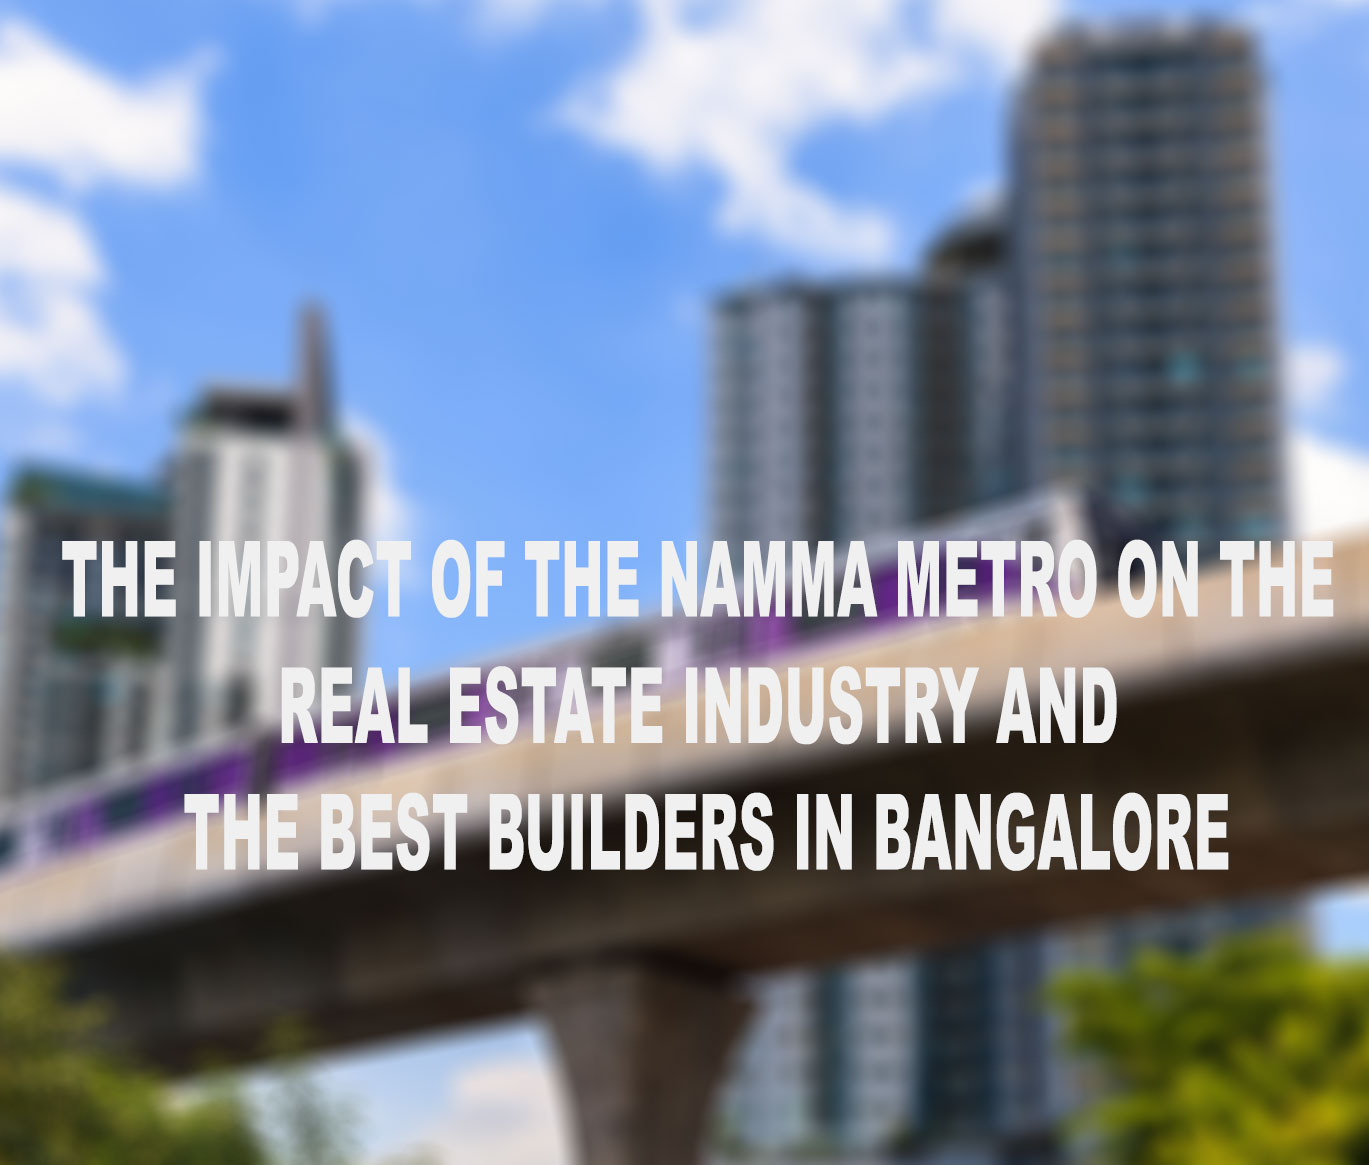 The Impact of the Namma Metro on the Real Estate Industry and the best Builders in Bangalore